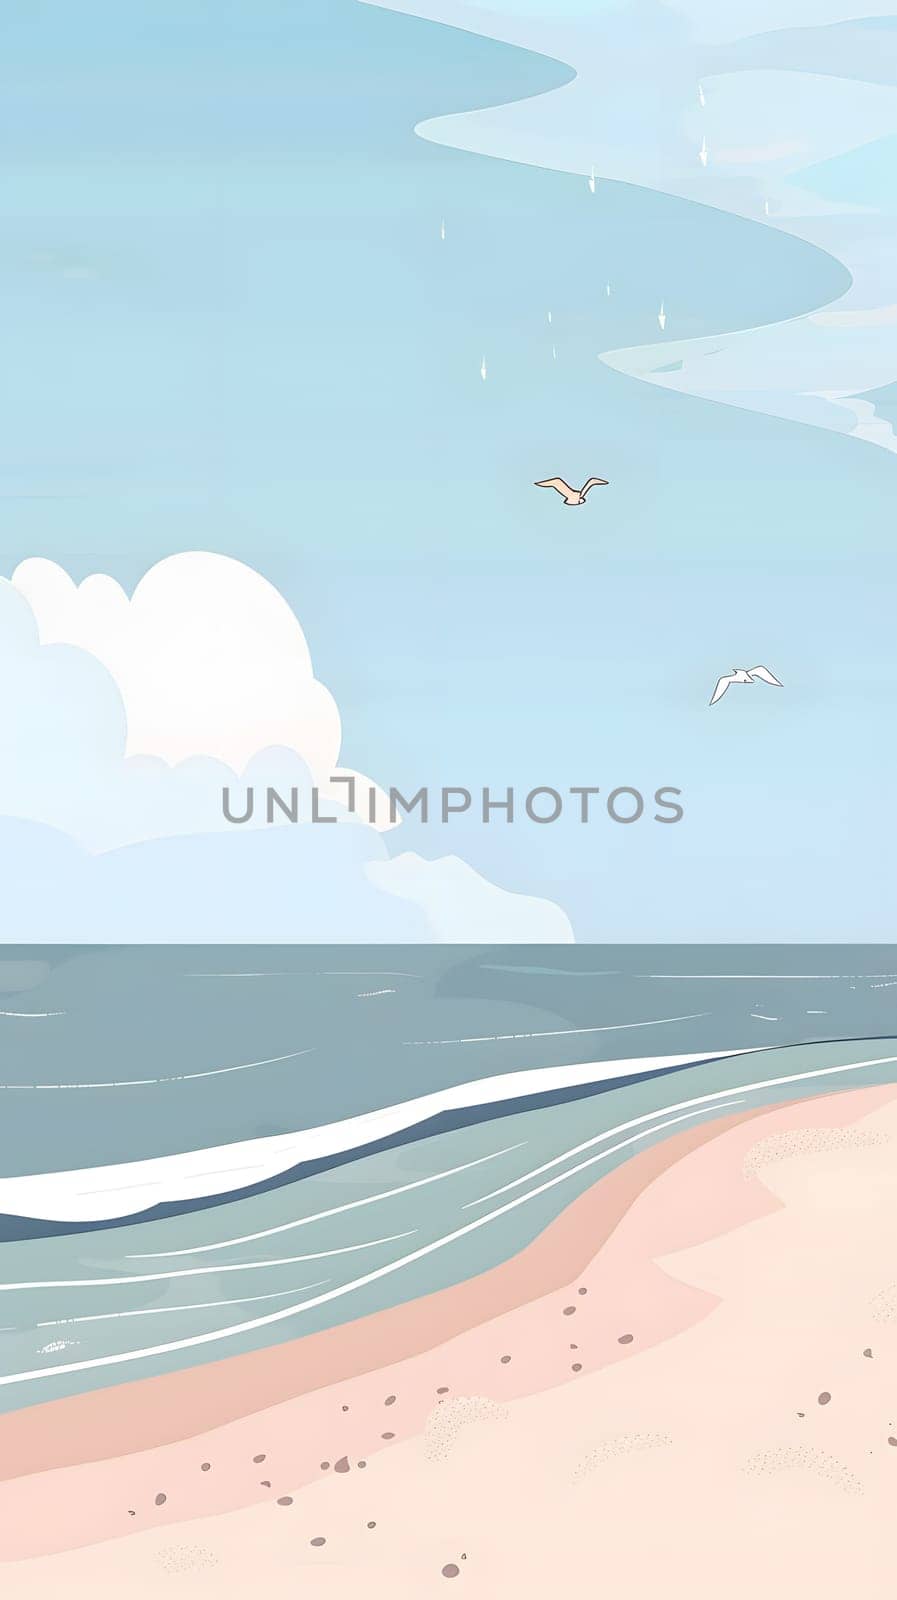 Cartoon beach scene with waves, birds, and cumulus clouds in the sky by Nadtochiy